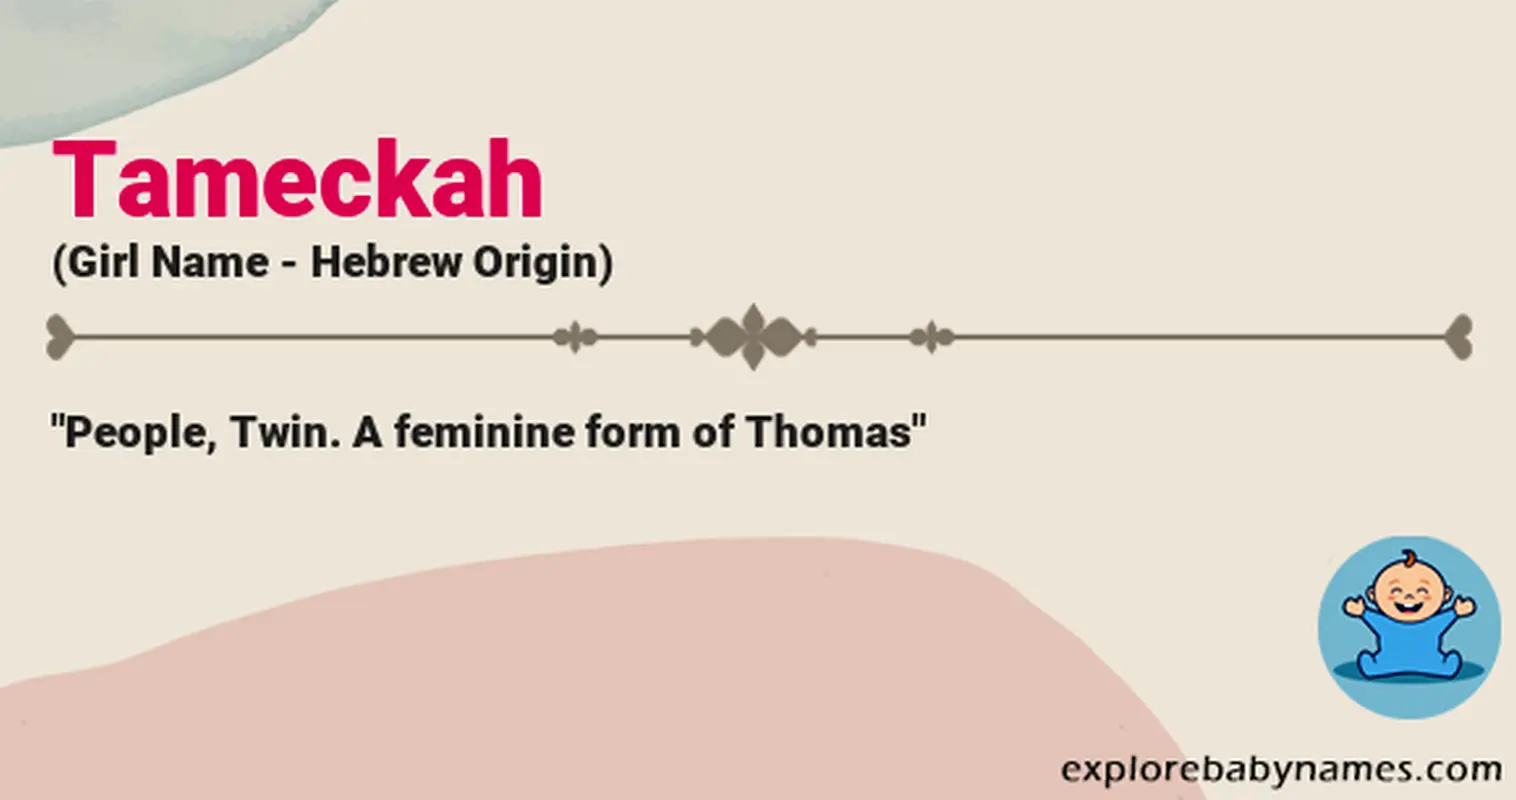 Meaning of Tameckah